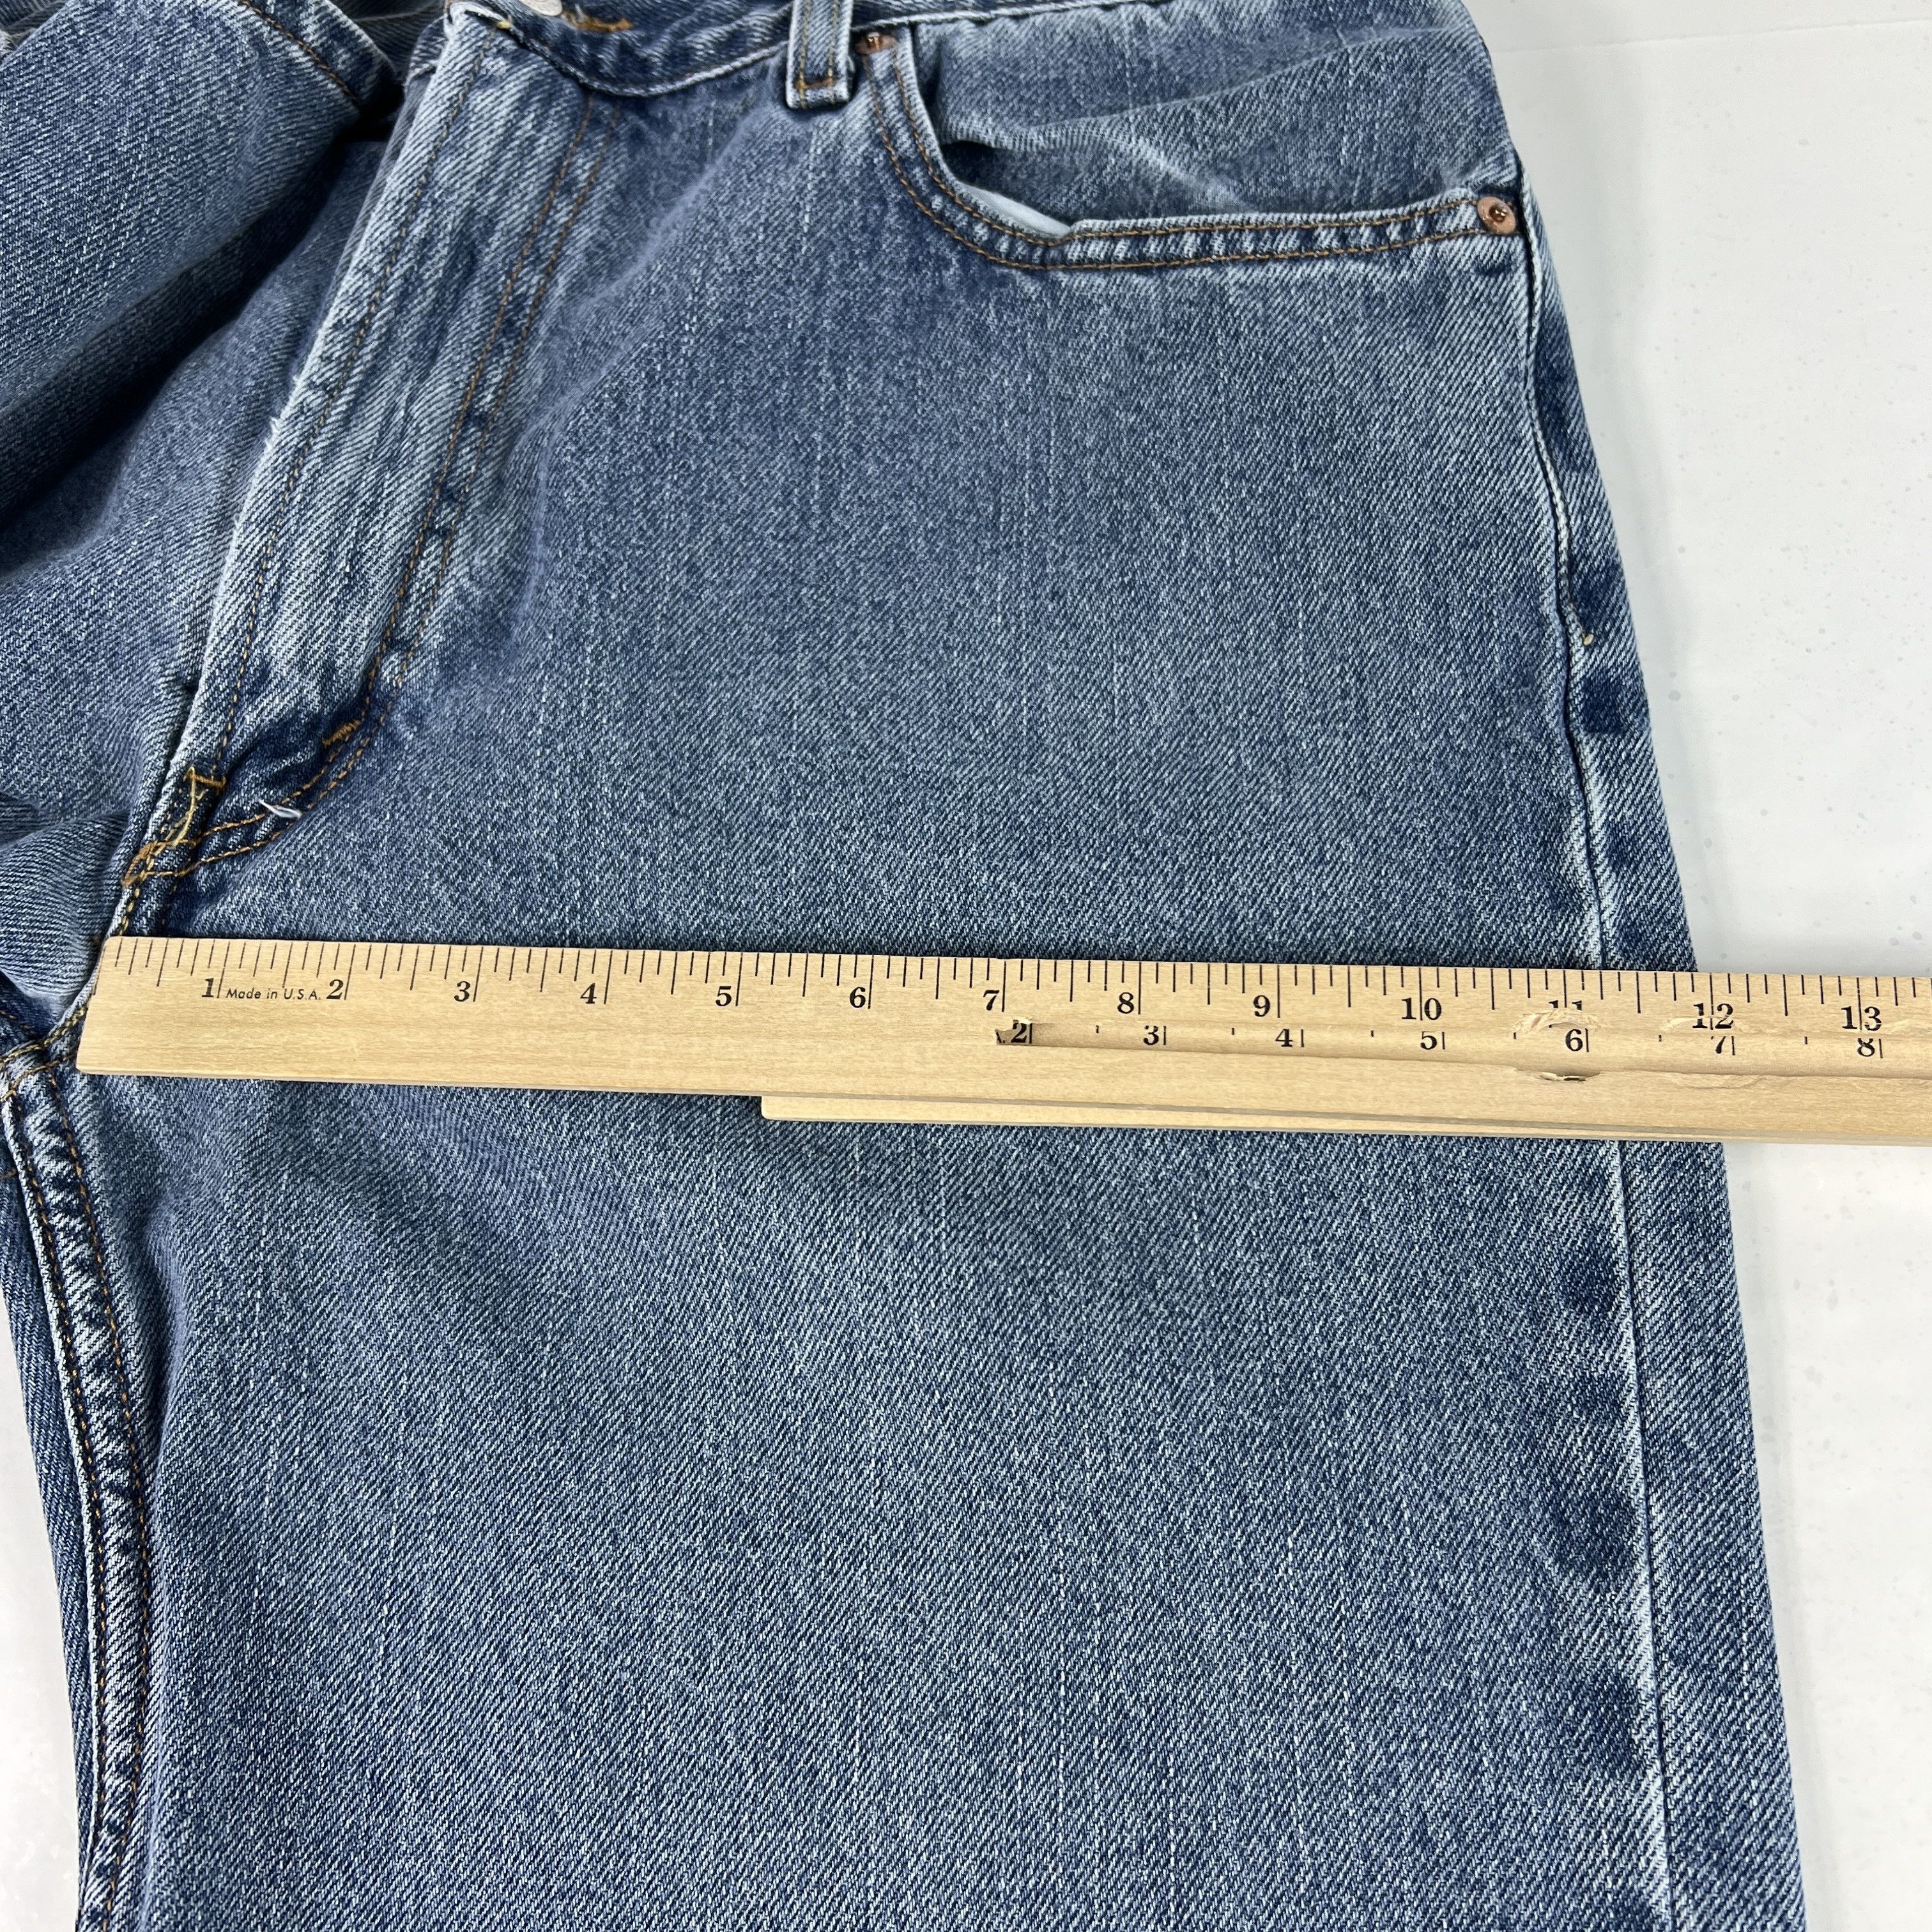 Levi's Y2K Levi's Jean 550 Relaxed Straight Blue Faded Cotton Denim Size US 34 / EU 50 - 20 Thumbnail